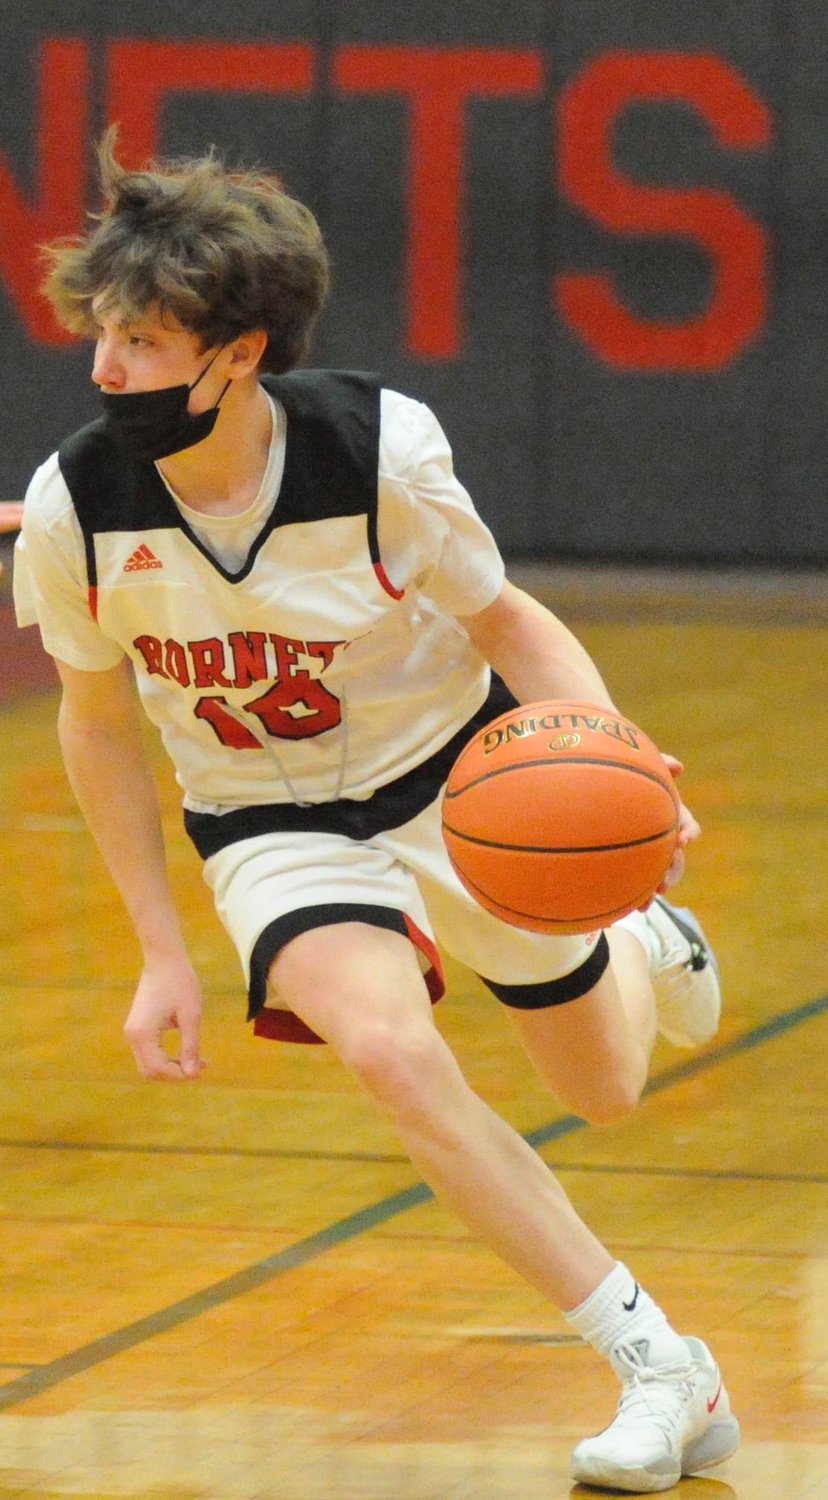 Up court. Honesdale’s Karter Kromko posted nine points, all 3-pointers.